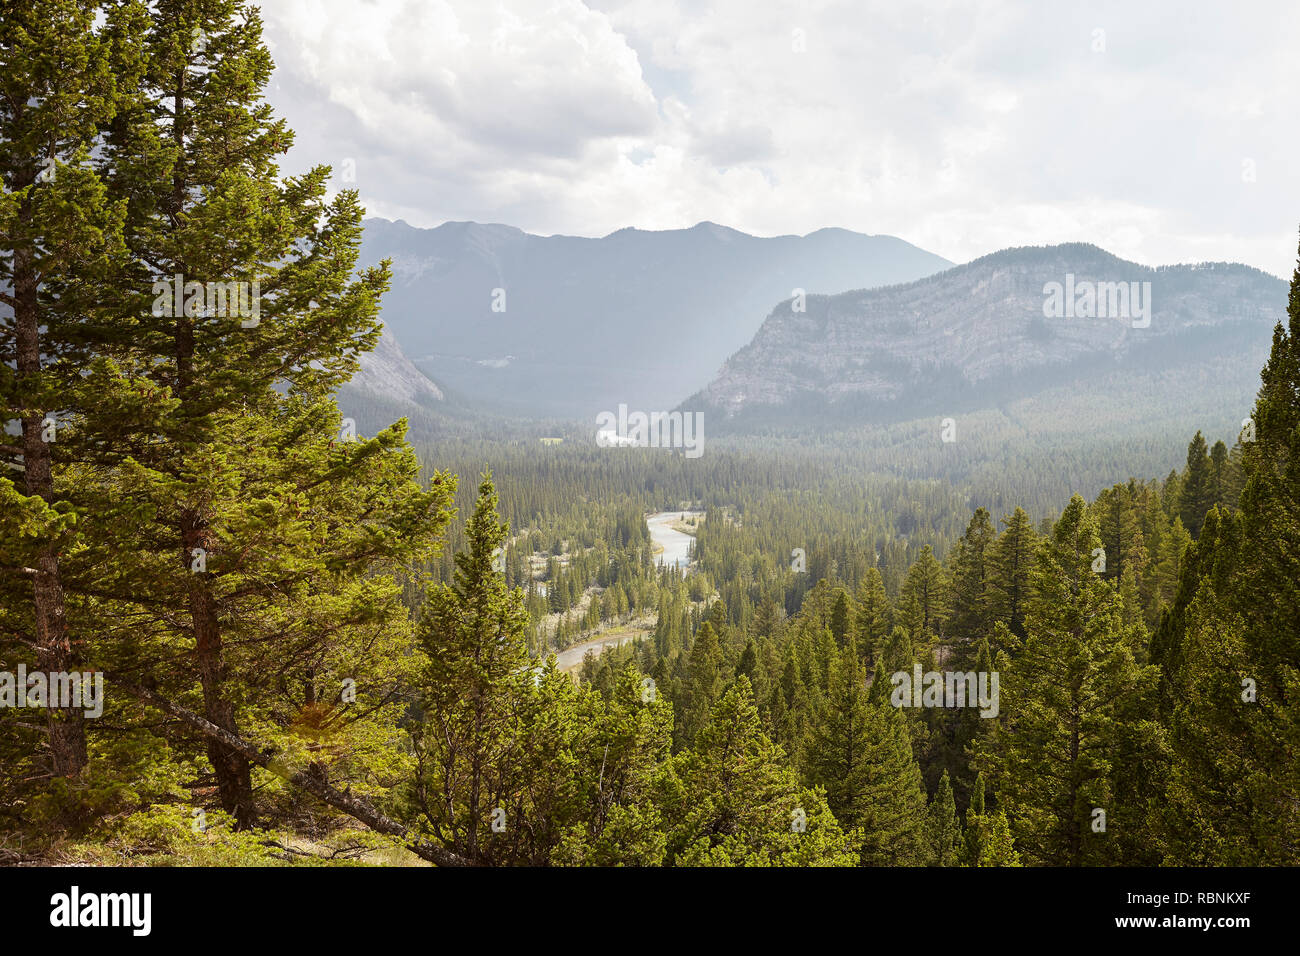 View Over River In Wooded Valley Between Mountains In Alaska Stock Photo